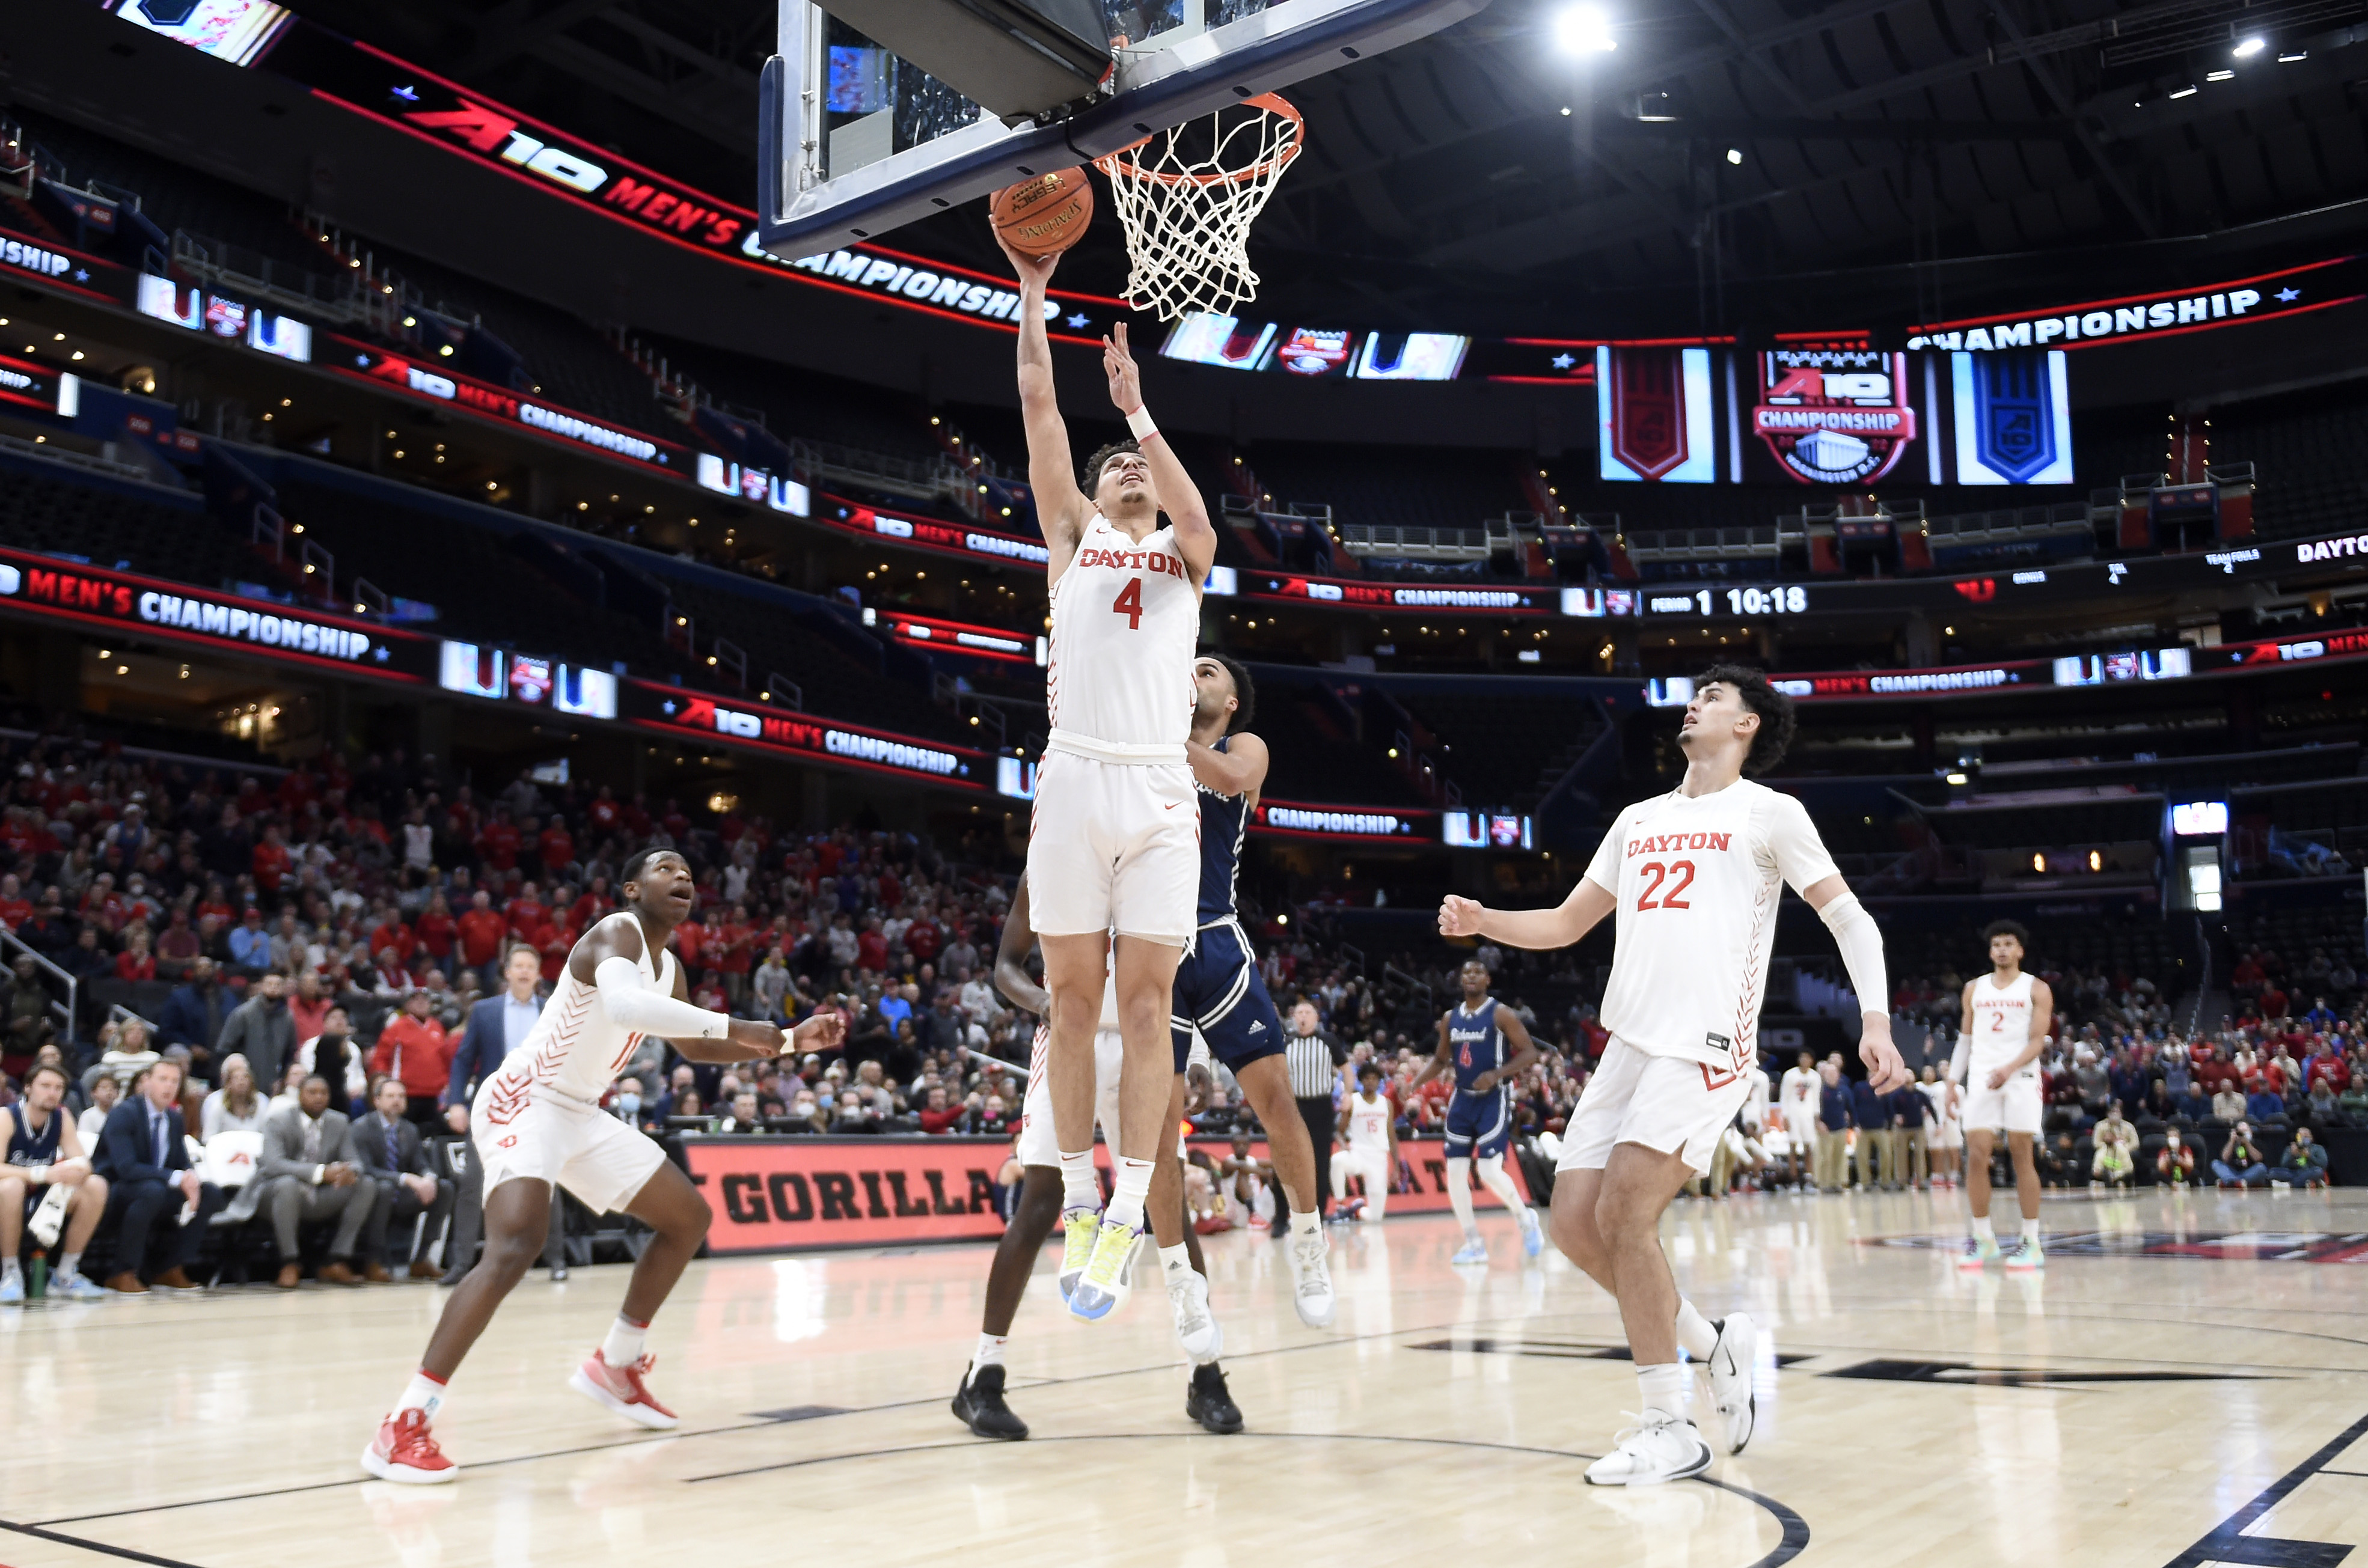 Dayton Flyers vs Toldeo Rockets basketball live stream, odds, time, TV channel, how to watch NIT Tournament online (3/16/22)